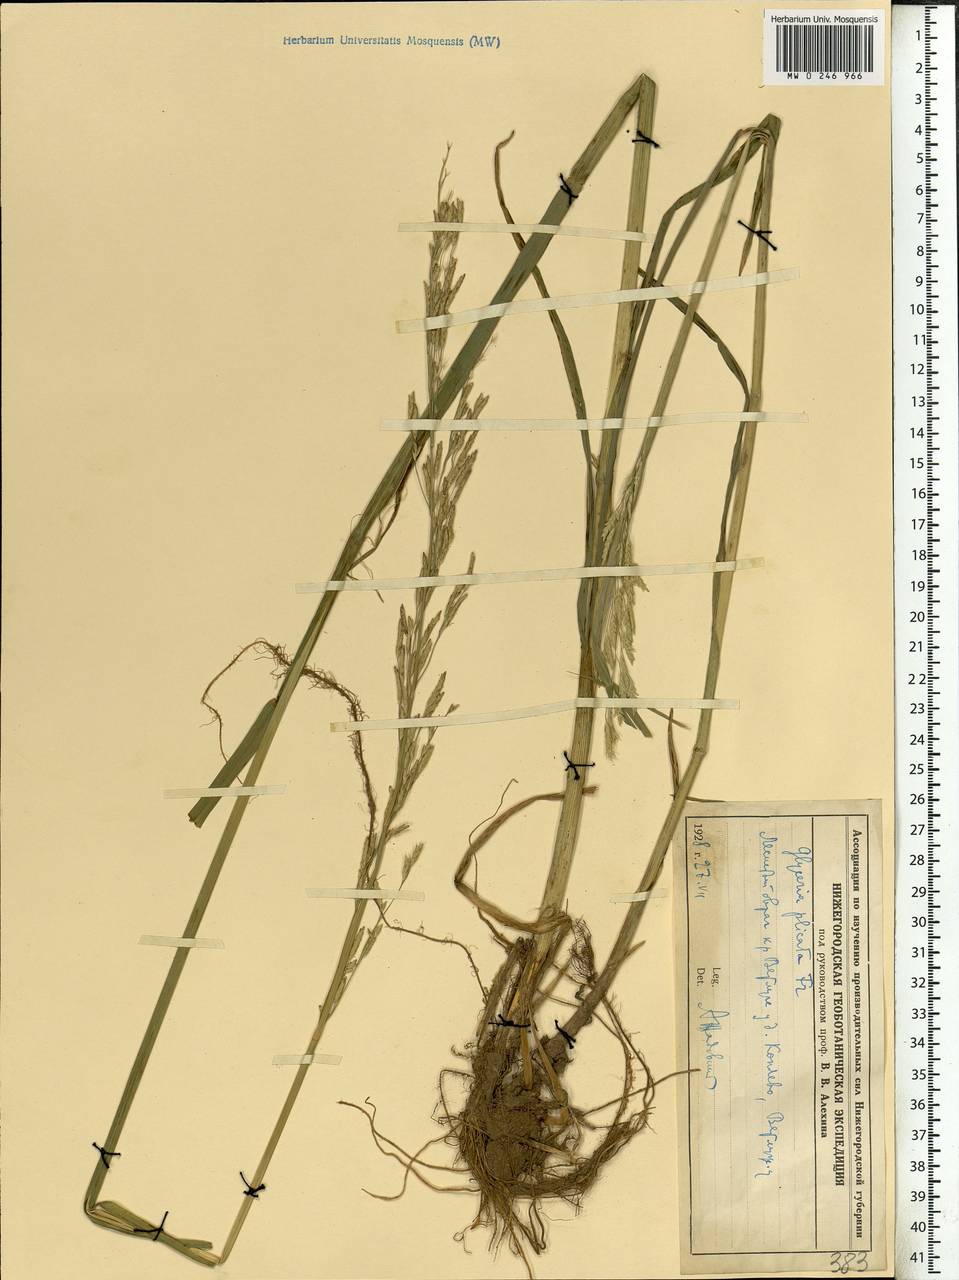 Glyceria notata Chevall., Eastern Europe, Central forest region (E5) (Russia)